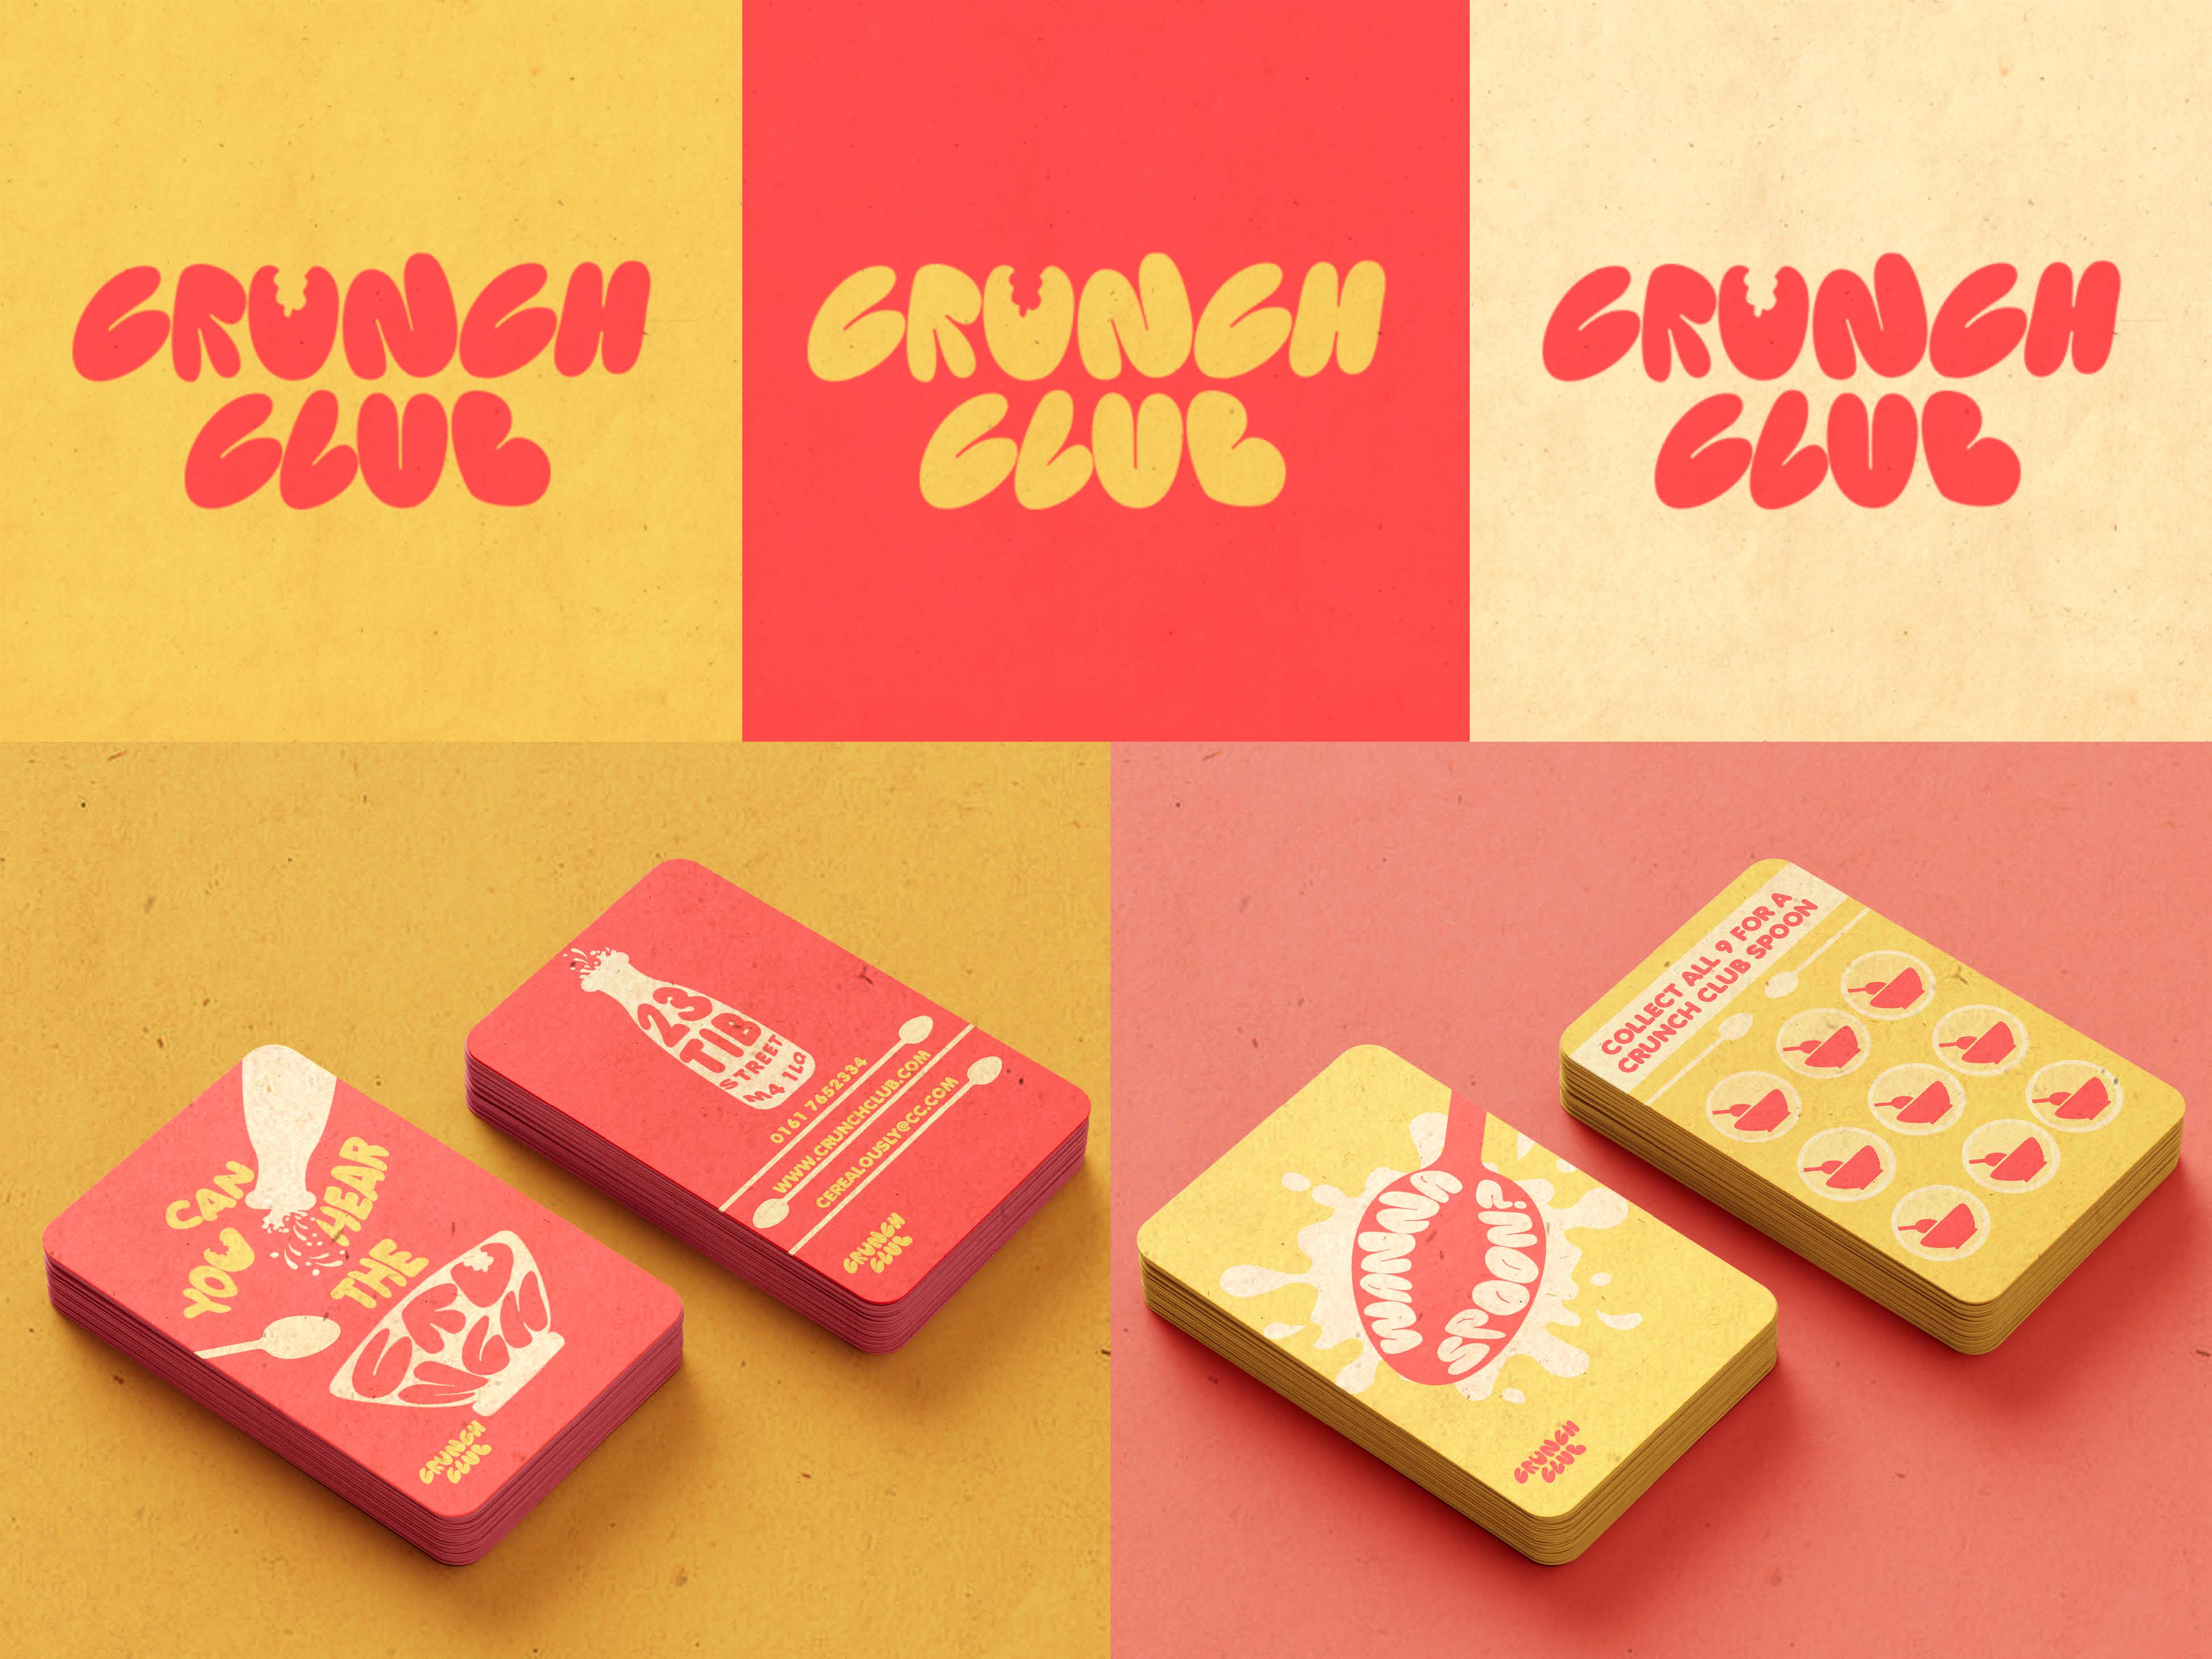 Crunch Club Cereal Cafe Brand Identity Logo and Business cards by Estelle Naderi. Cards are punk and yellow with 'Grunch Club' in a rounded type.